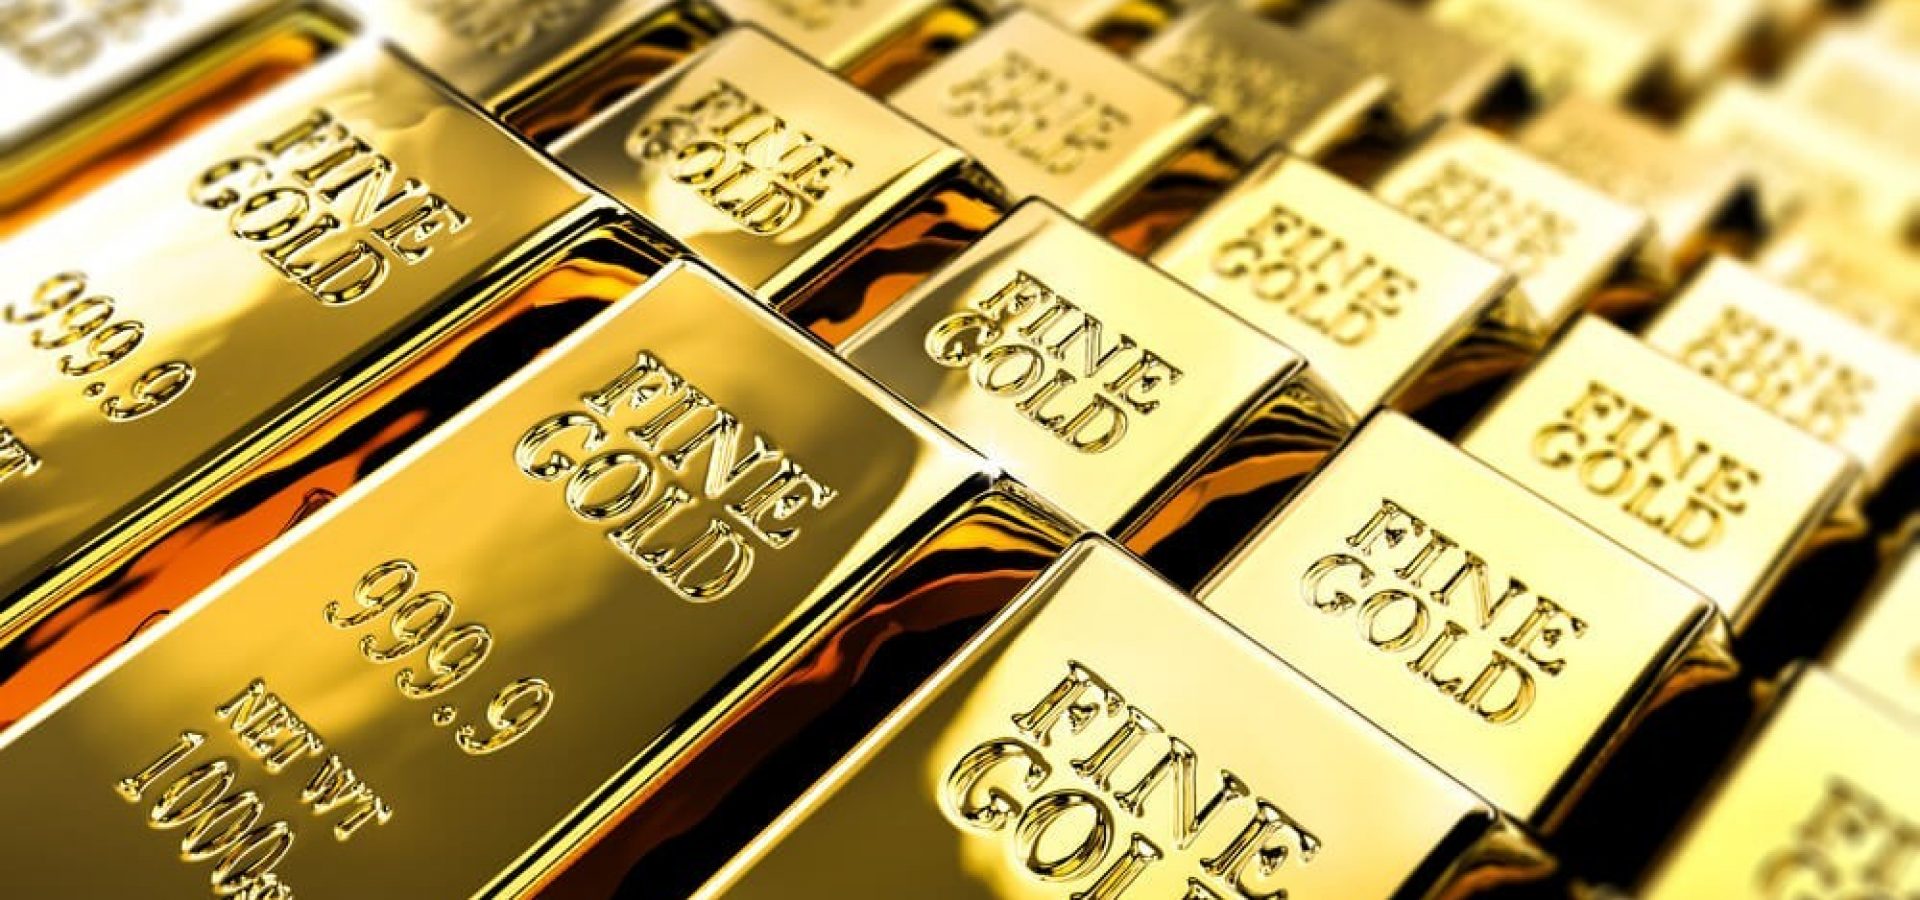 Pile of Gold bars.